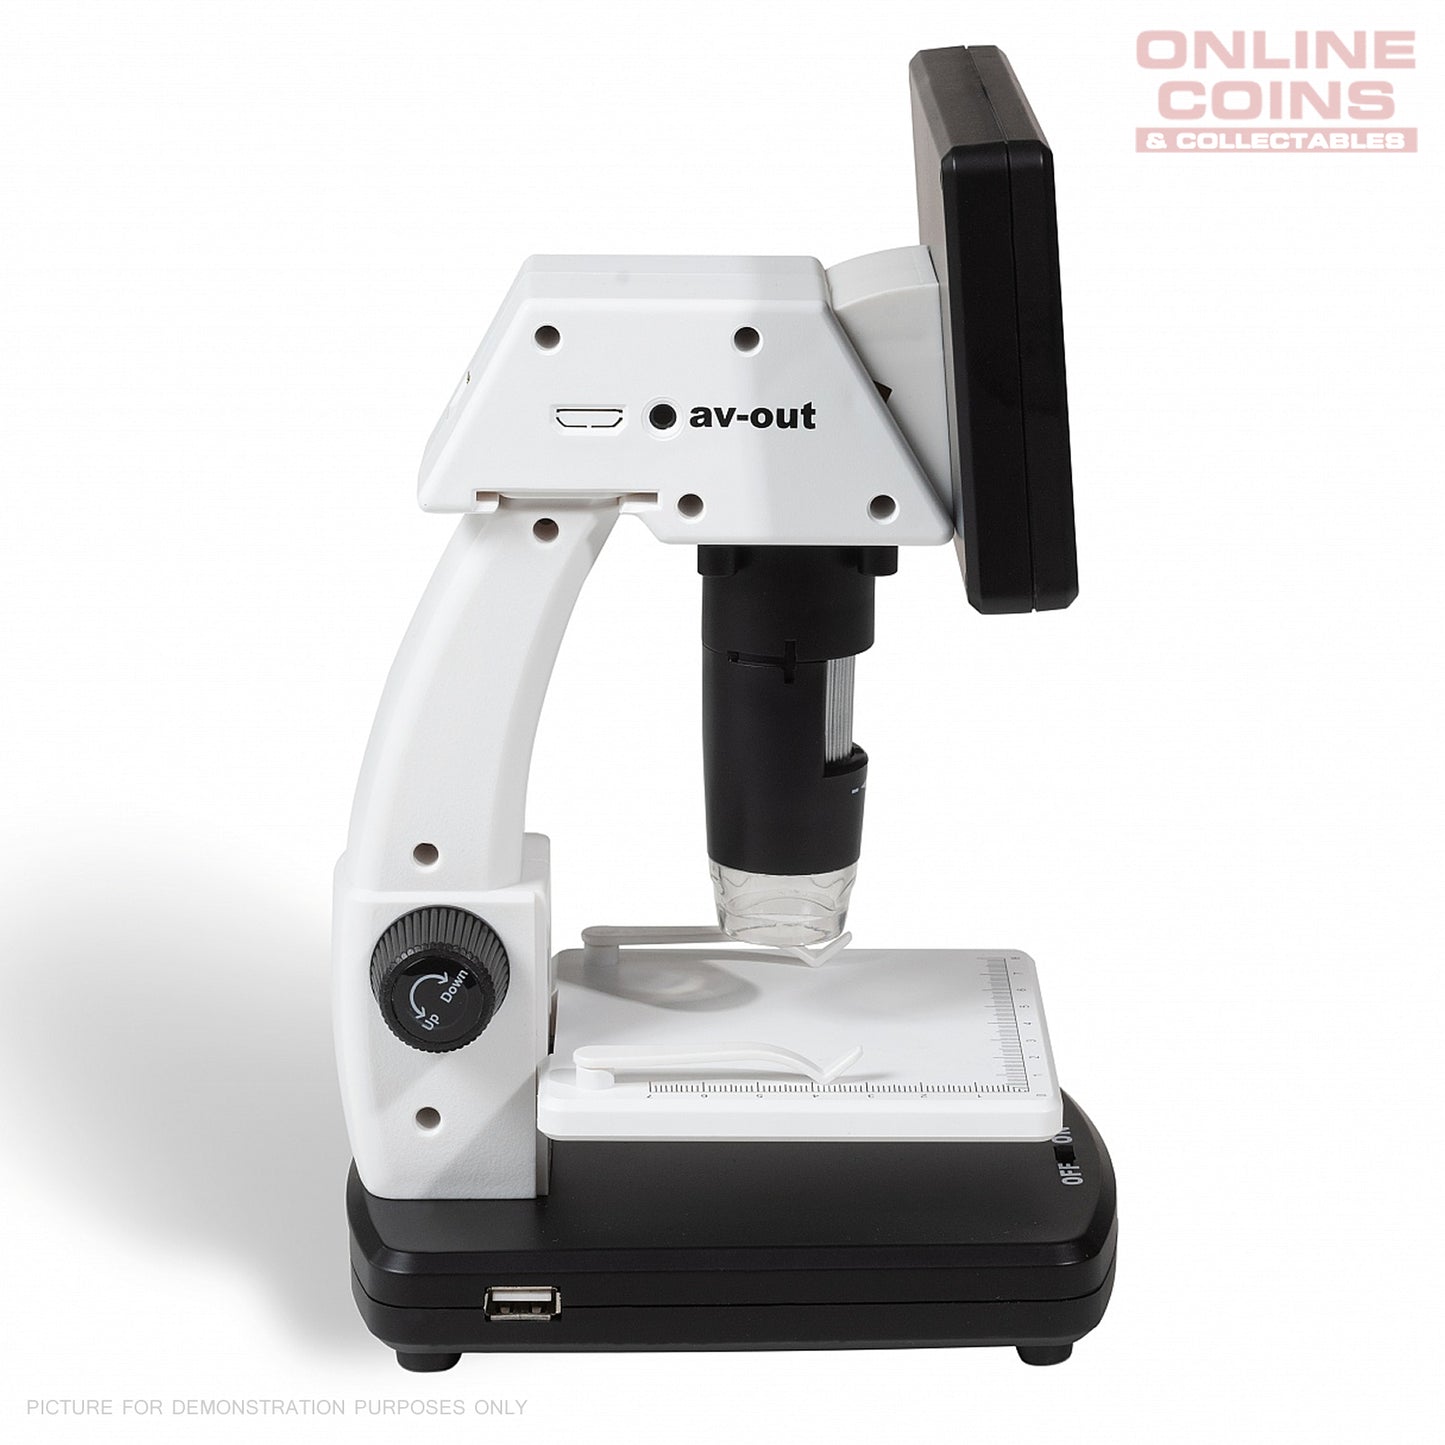 Lighthouse DM5 LCD Digital Microscope - 20x to 200x Magnification